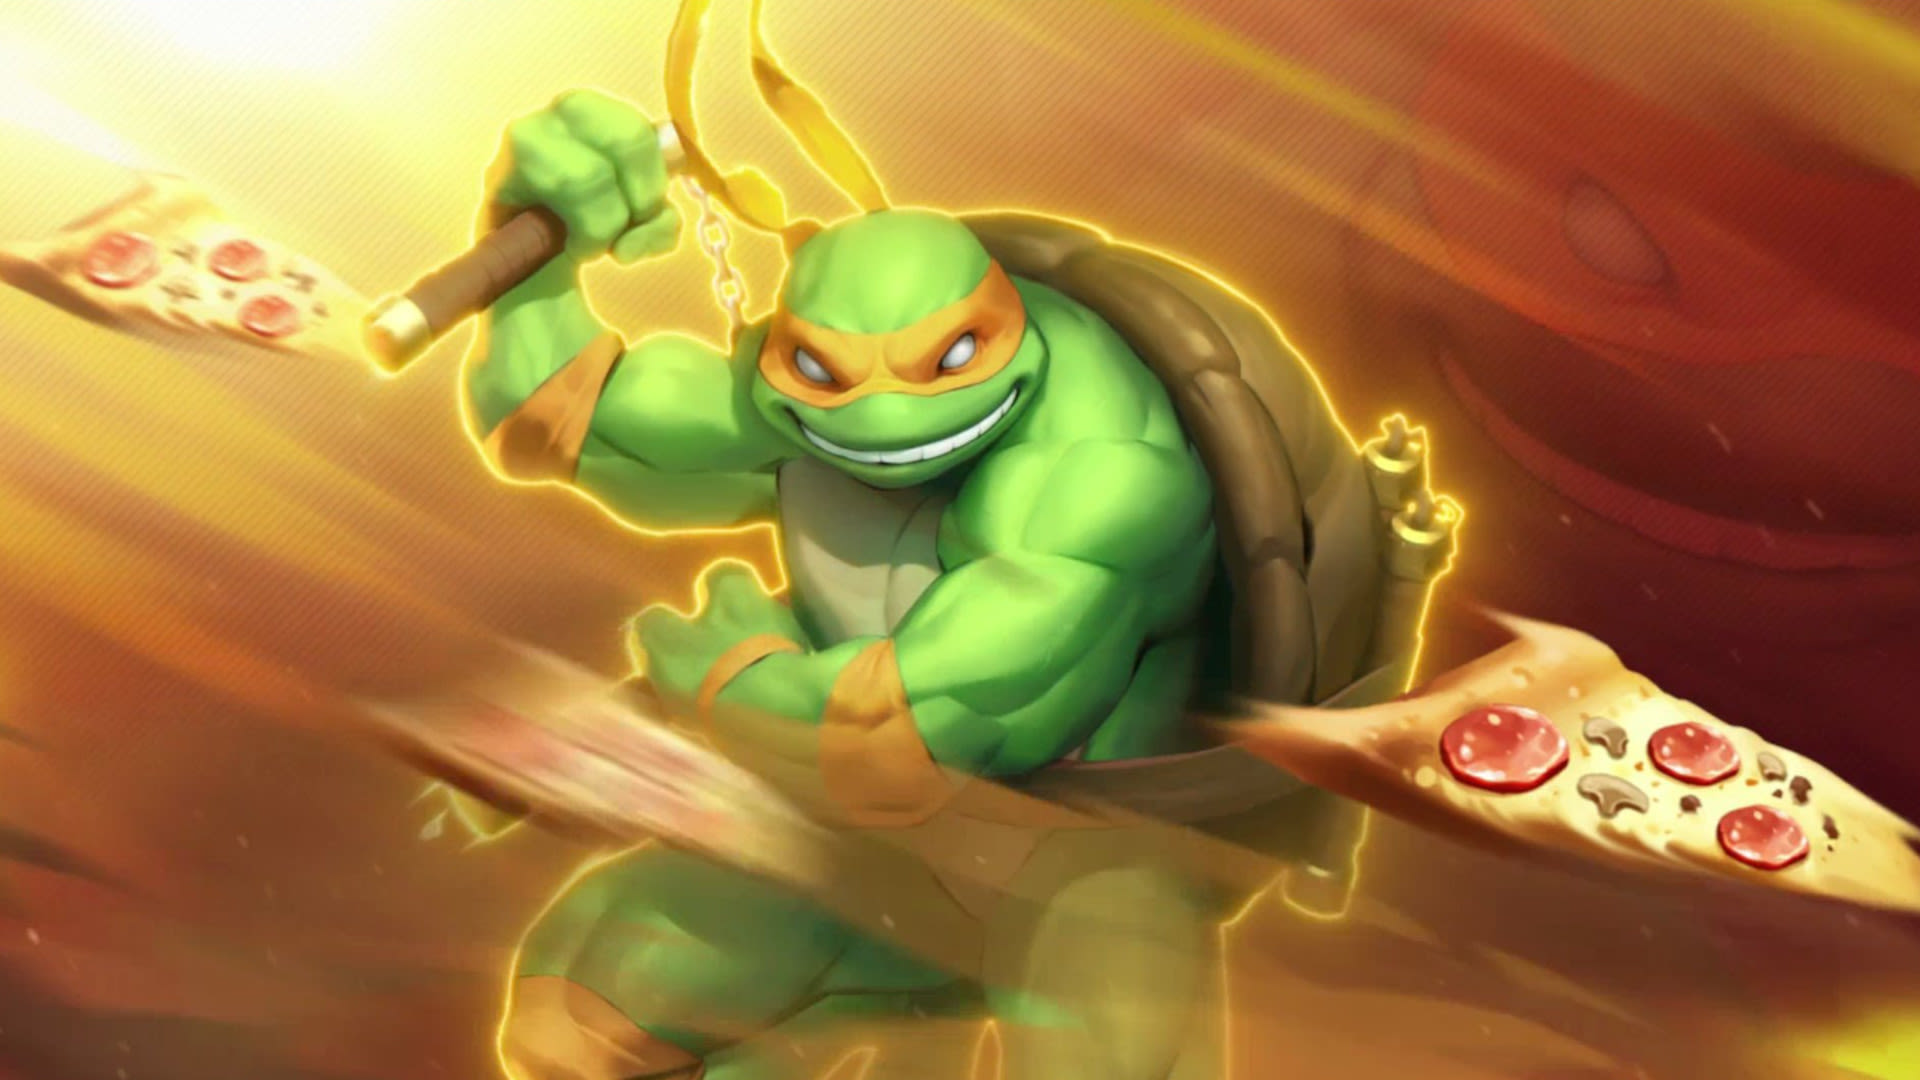 The Teenage Mutant Ninja Turtles have emerged from the sewers to fight alongside Ryu and the gang in Street Fighter: Duel